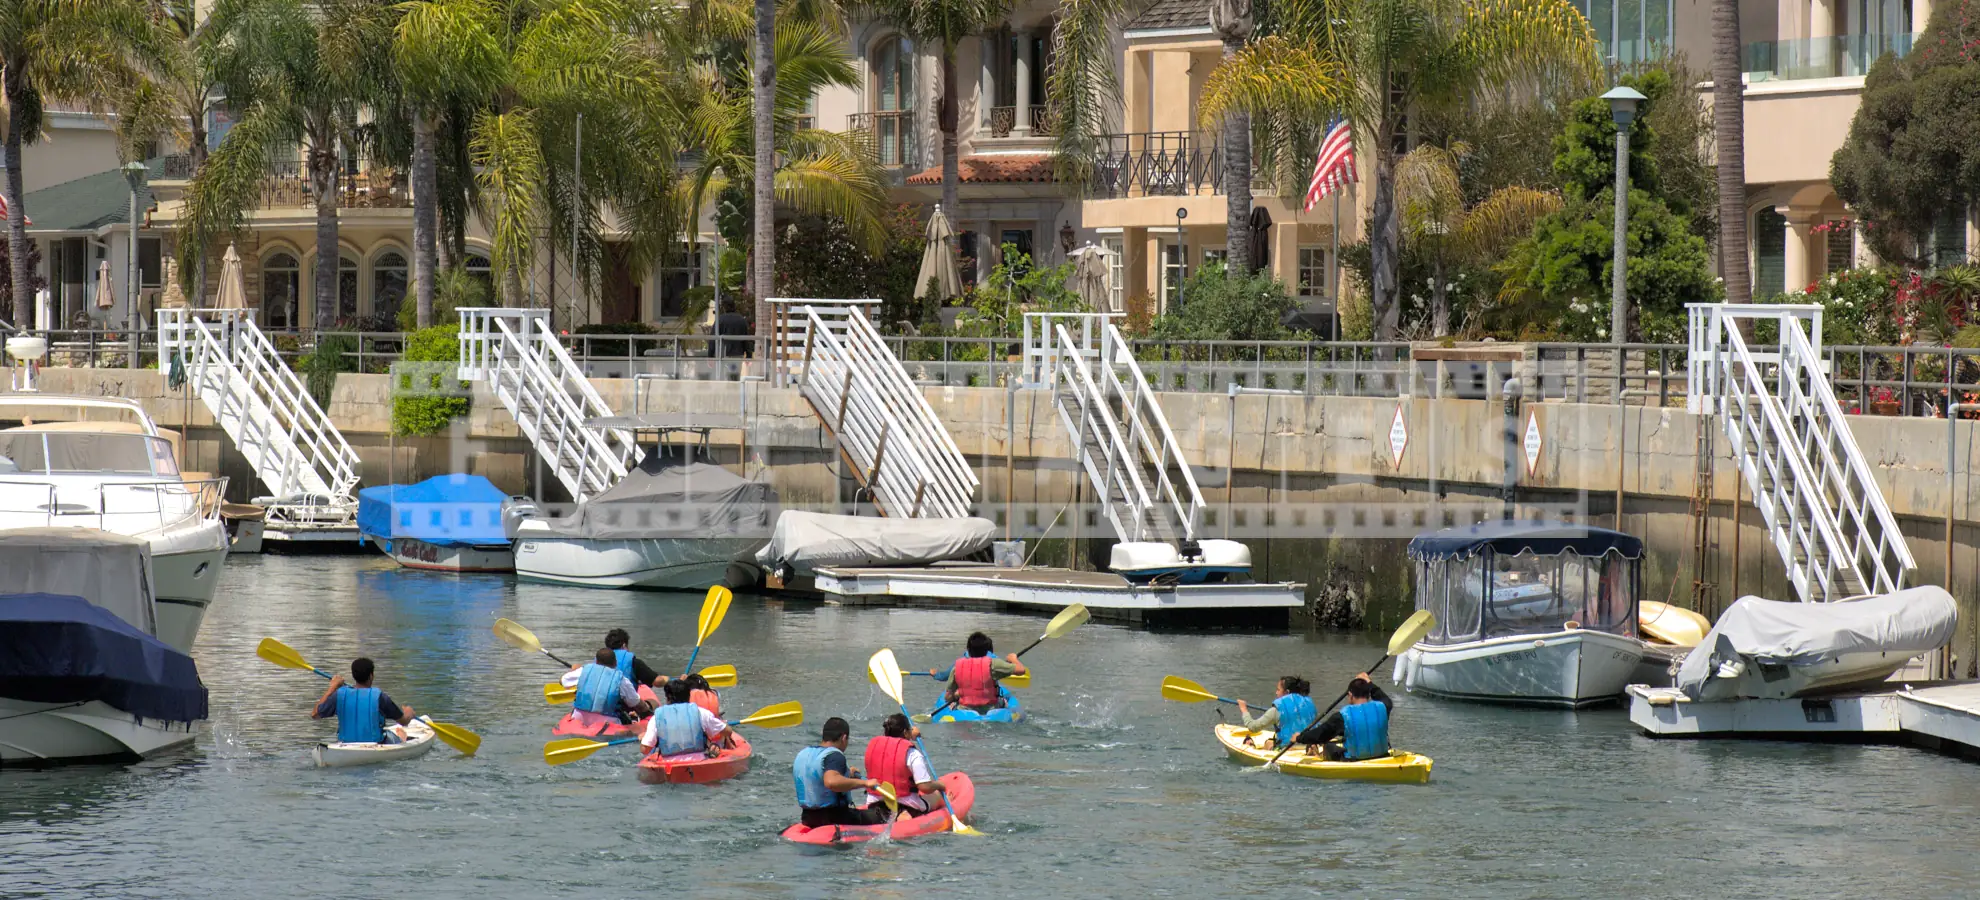 Group of kayakers at Naples Island Canals